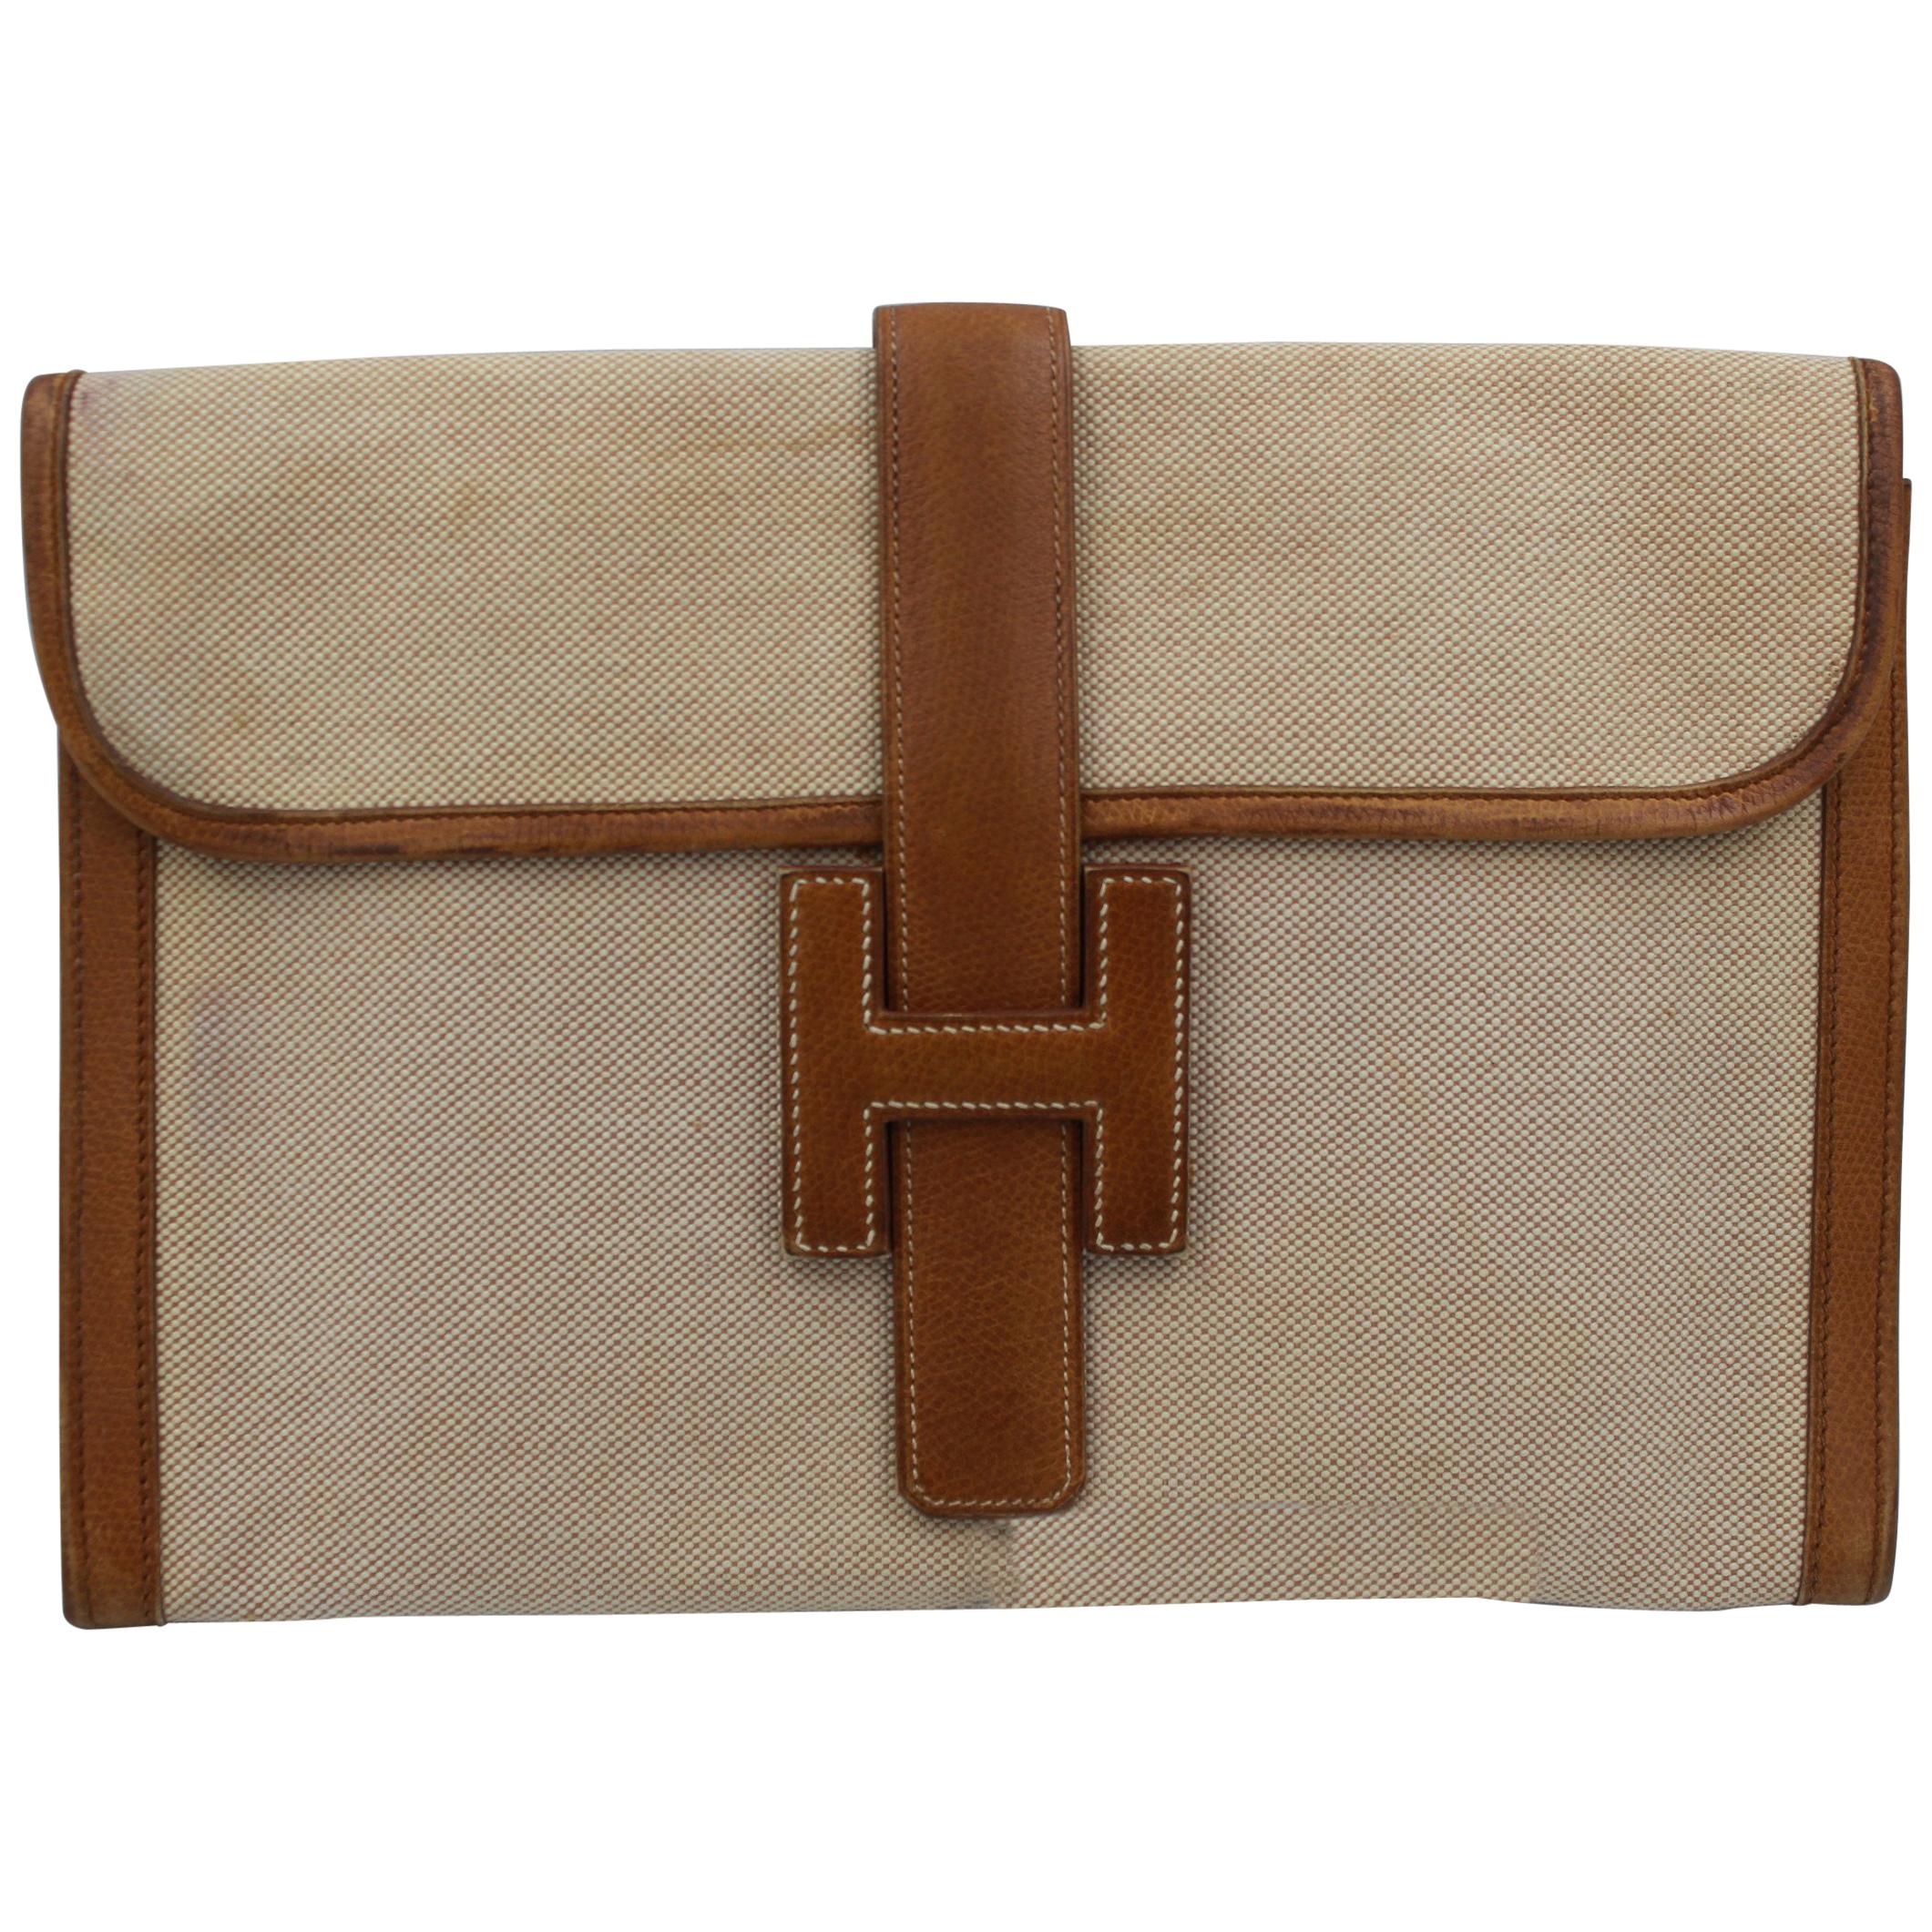 Vintage Hermes Jige MM Clutch in Canvas and Leather.